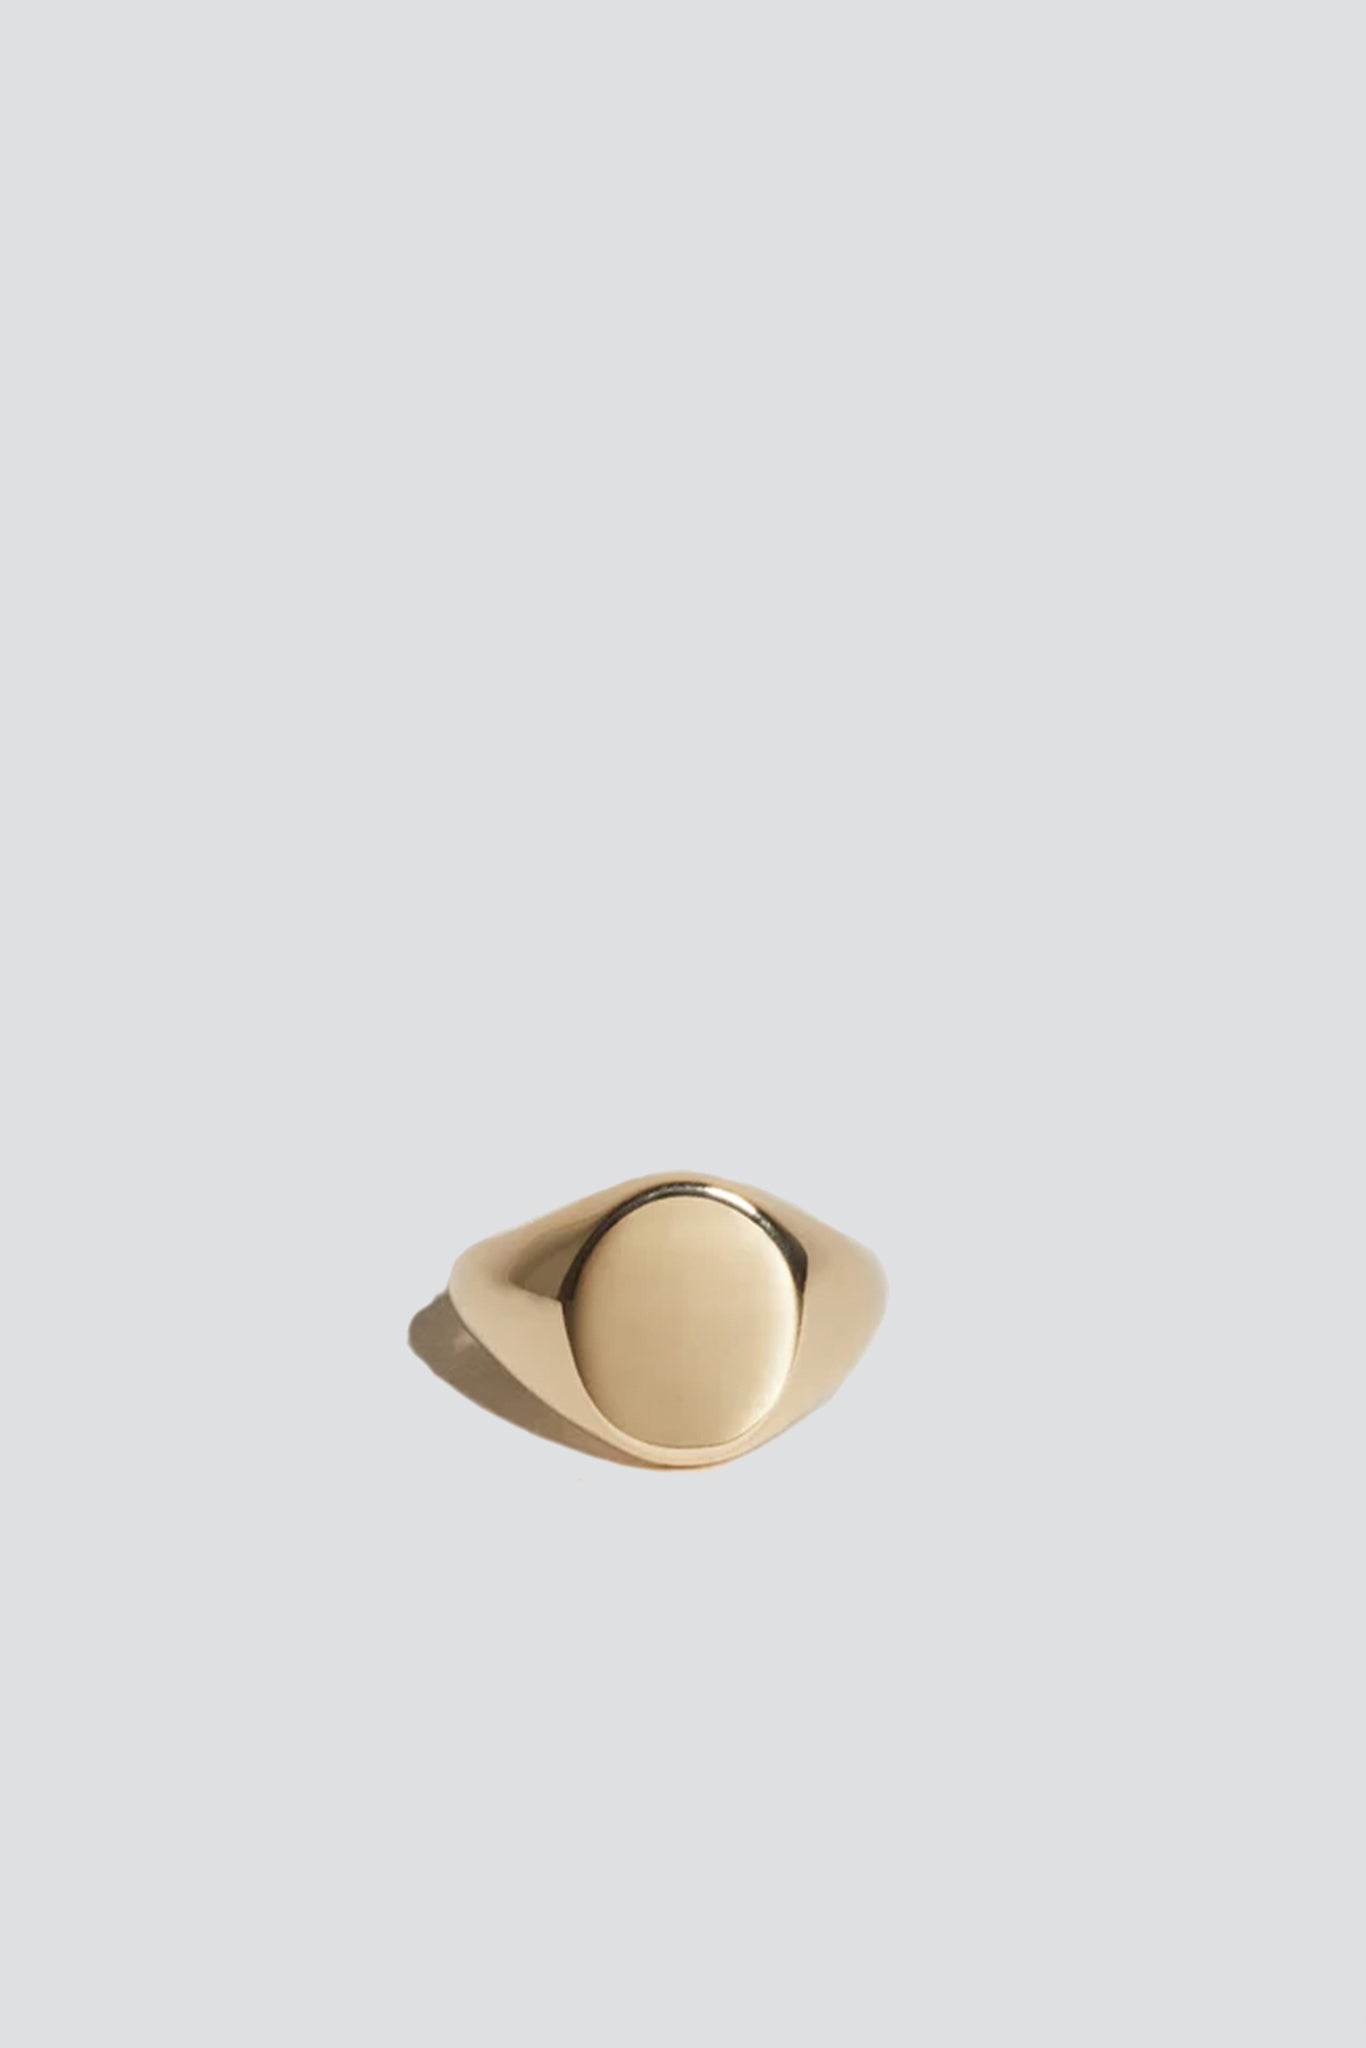 14K Gold Oval Pinky Signet Ring